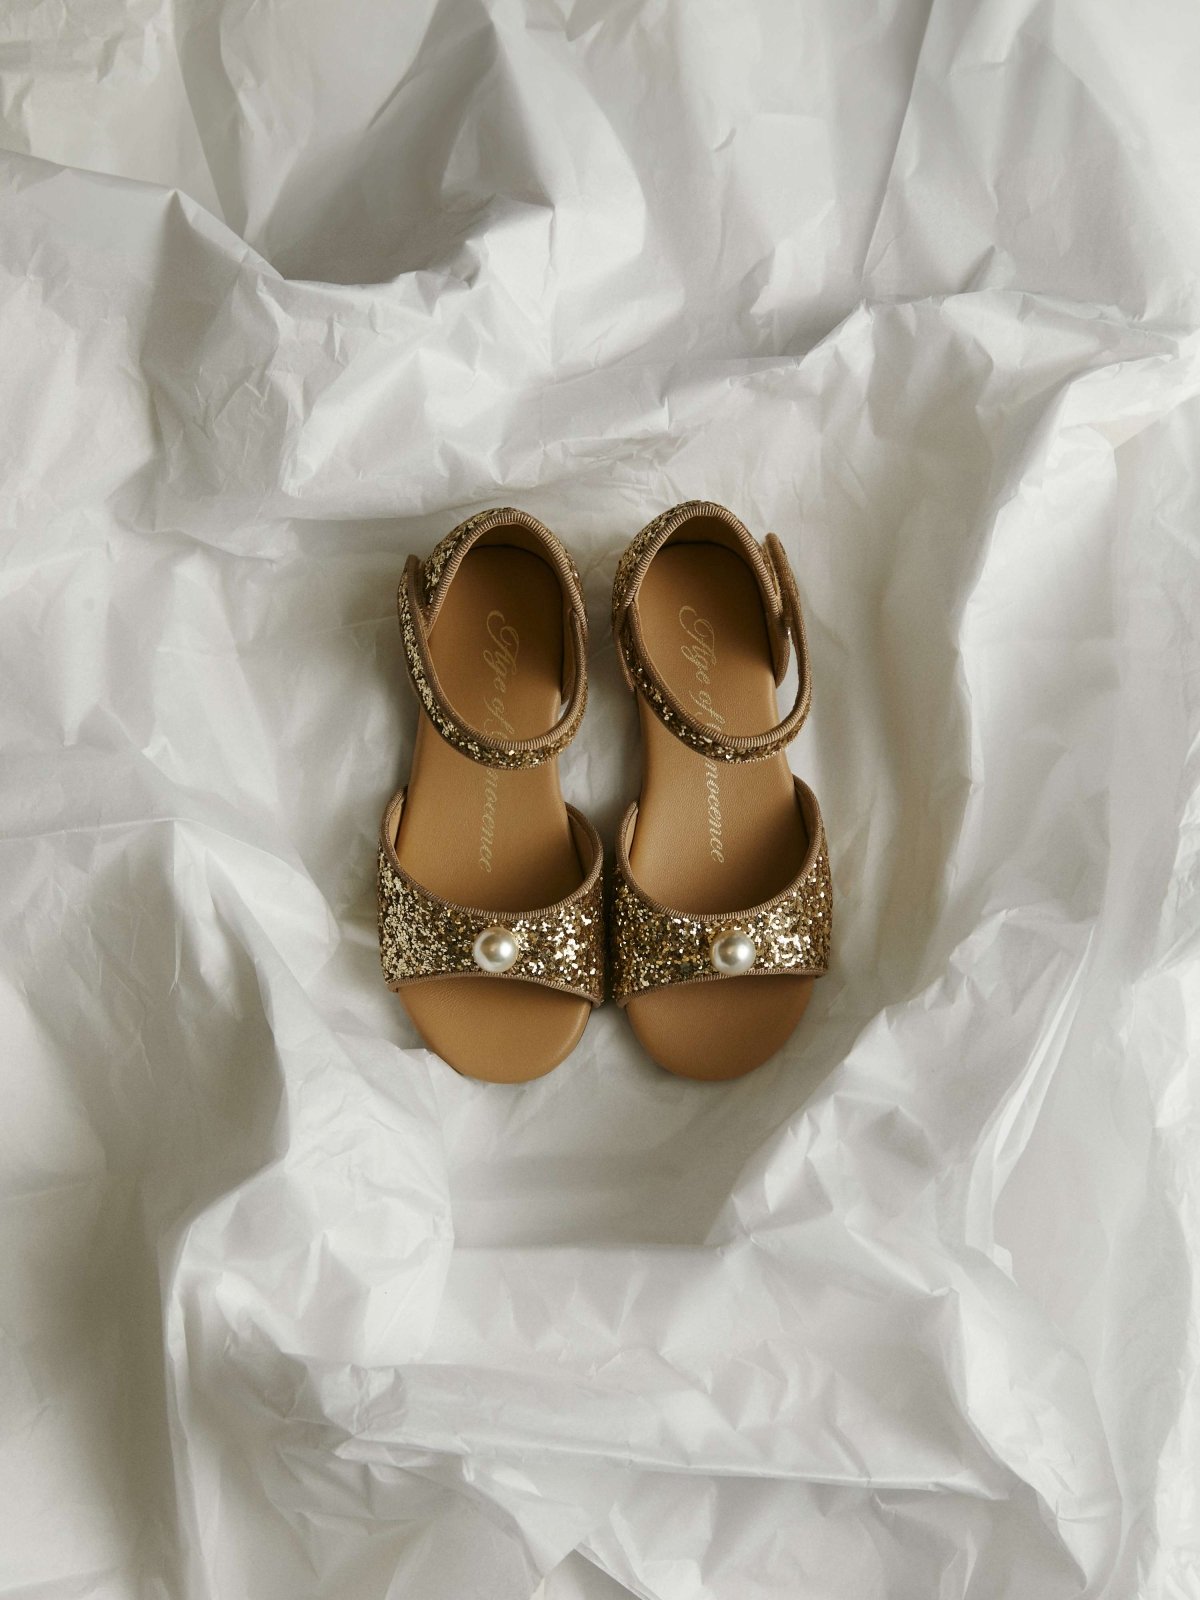 Mila Glitter Gold Sandals by Age of Innocence